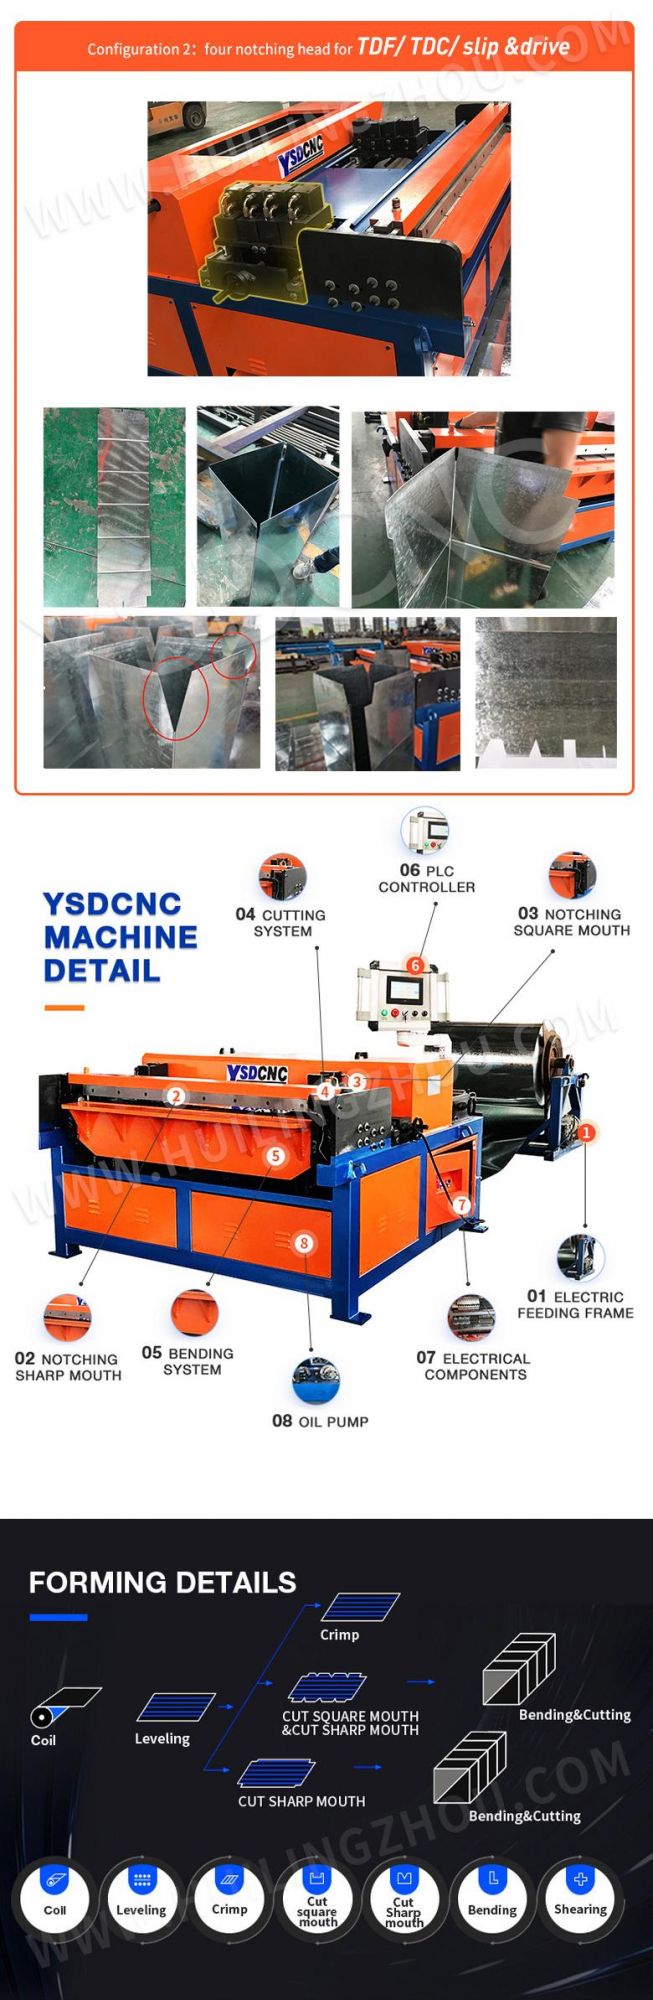 Ysdcnc Brand Factory Price Air Conditioning Pipe Forming Machine, High Quality Auto Duct Line 3